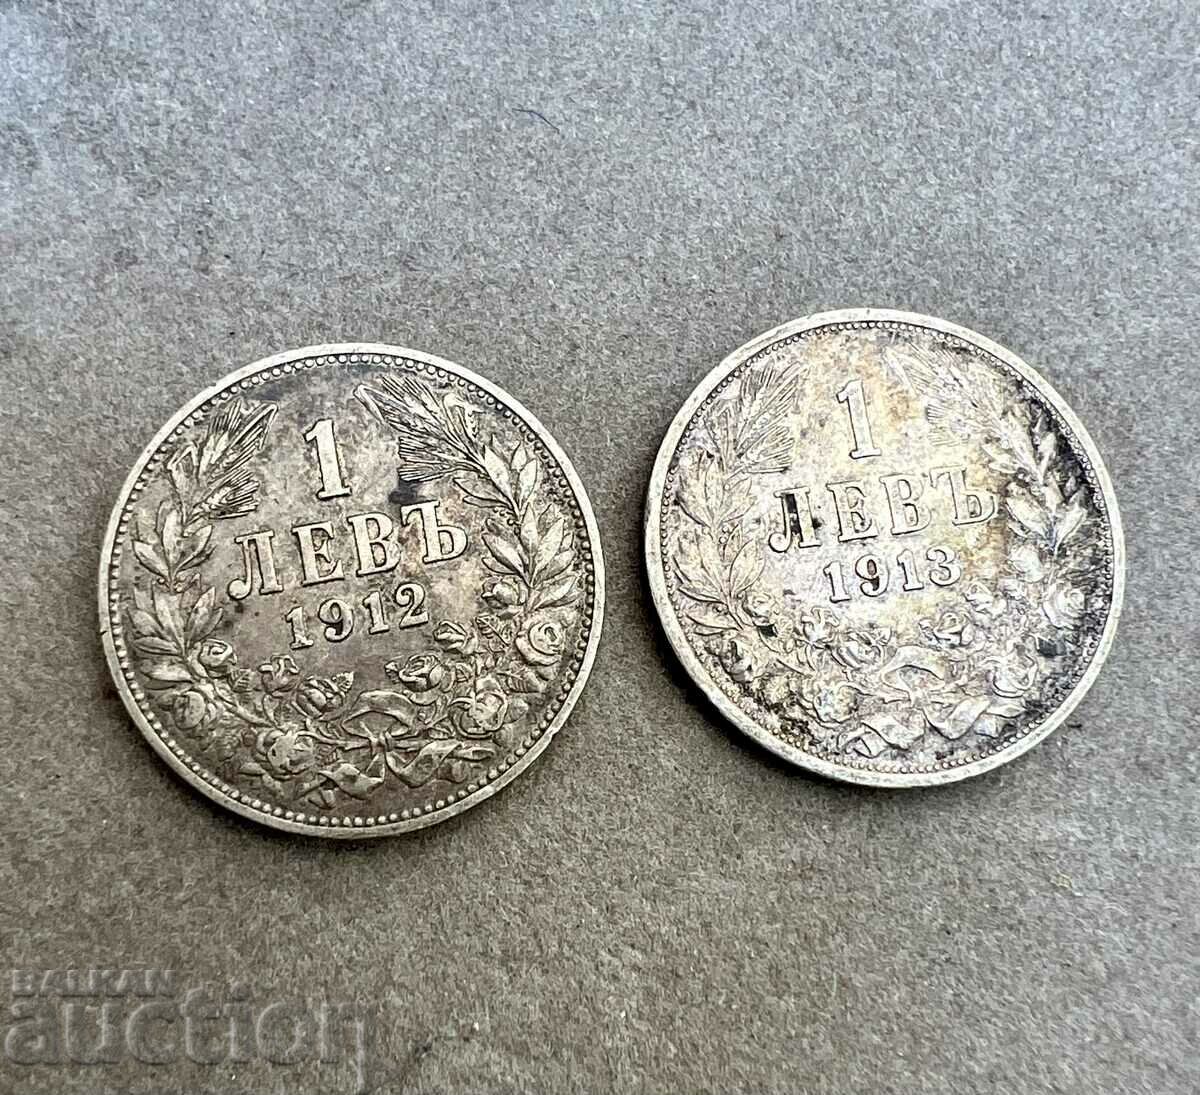 Royal coins 1 lev 1912 and 1913 silver Ferdinand